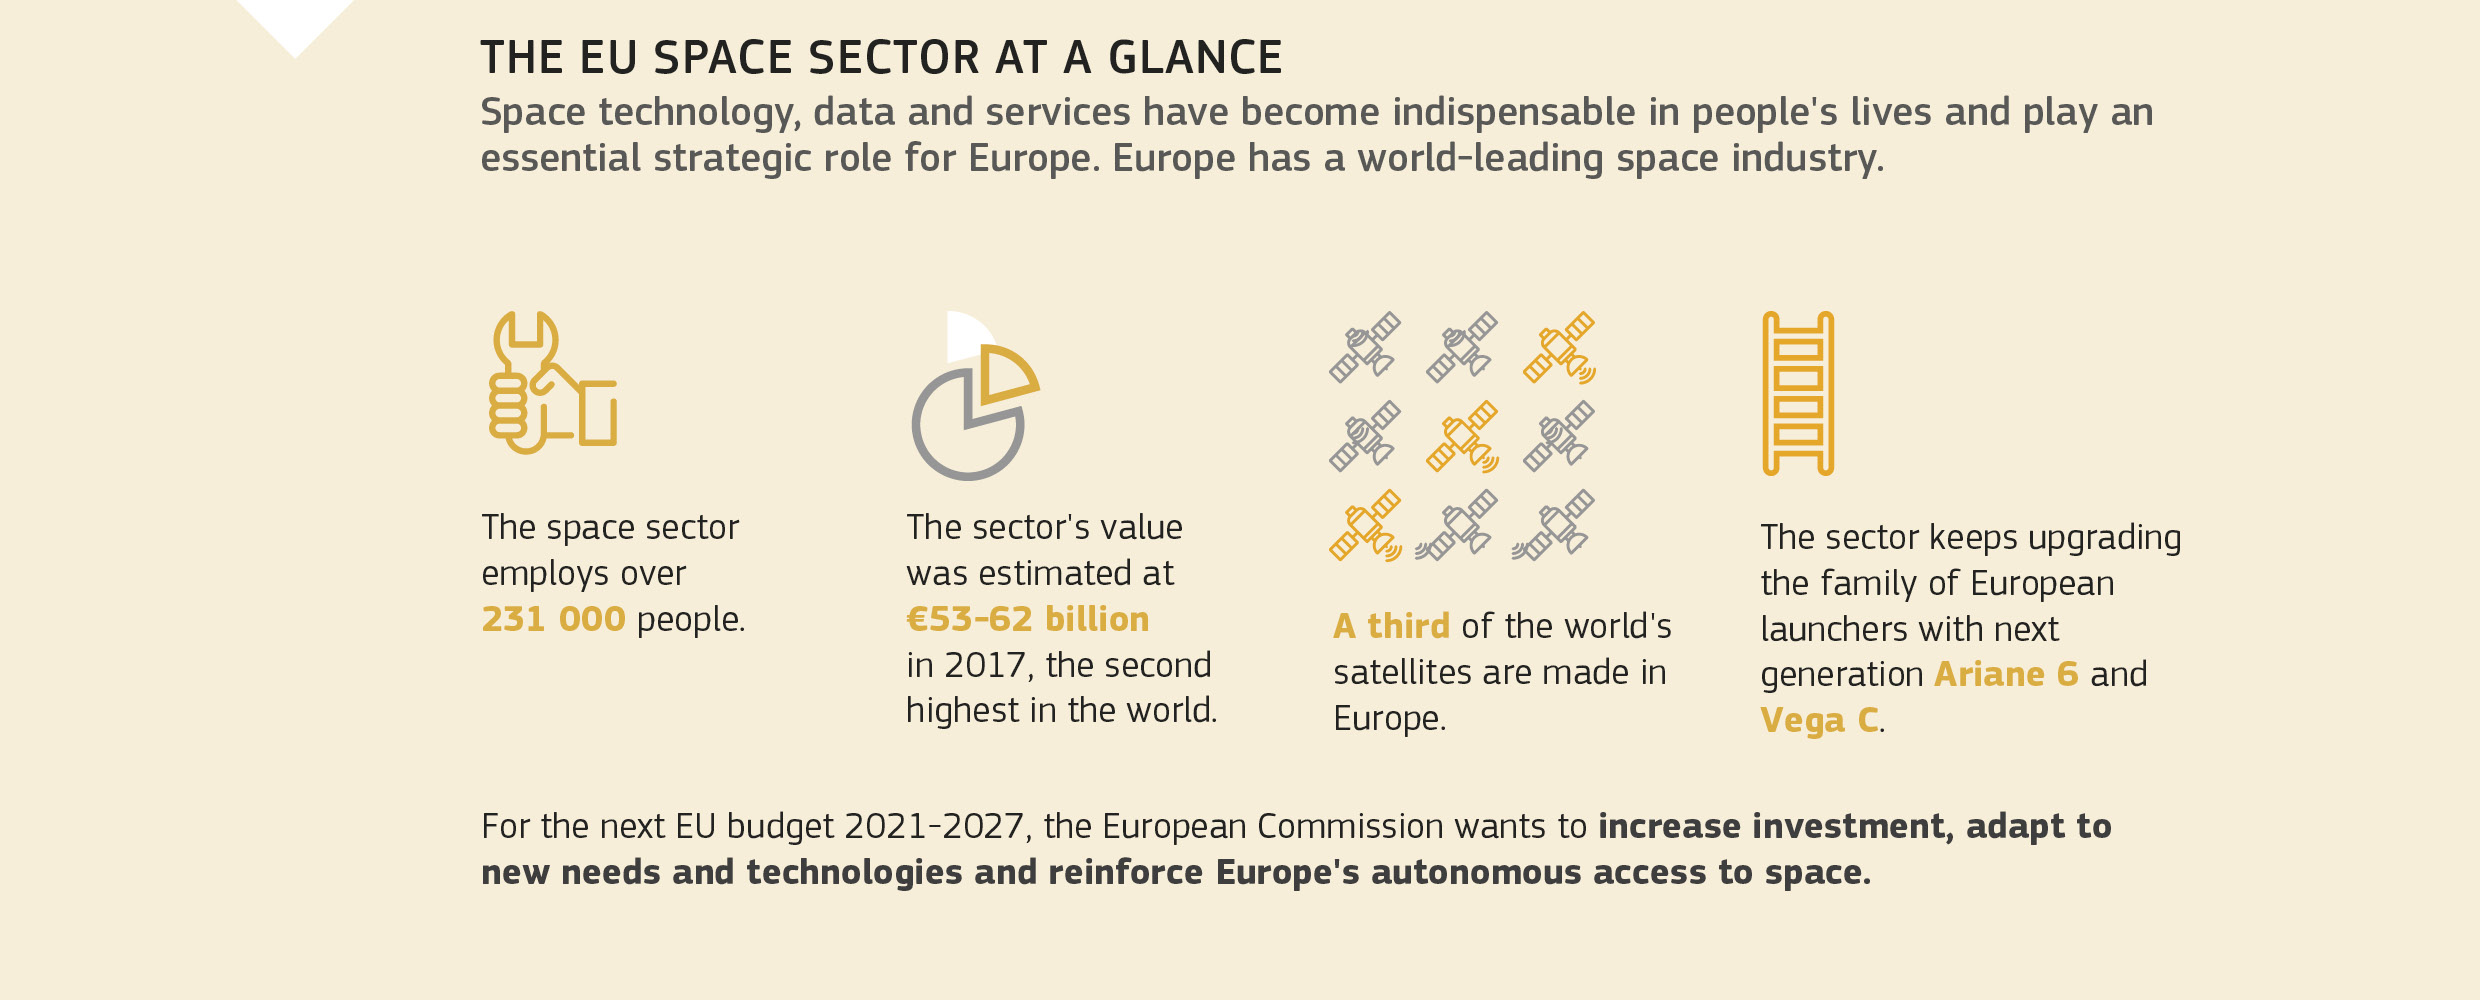 THE EU SPACE SECTOR AT A GLANCE